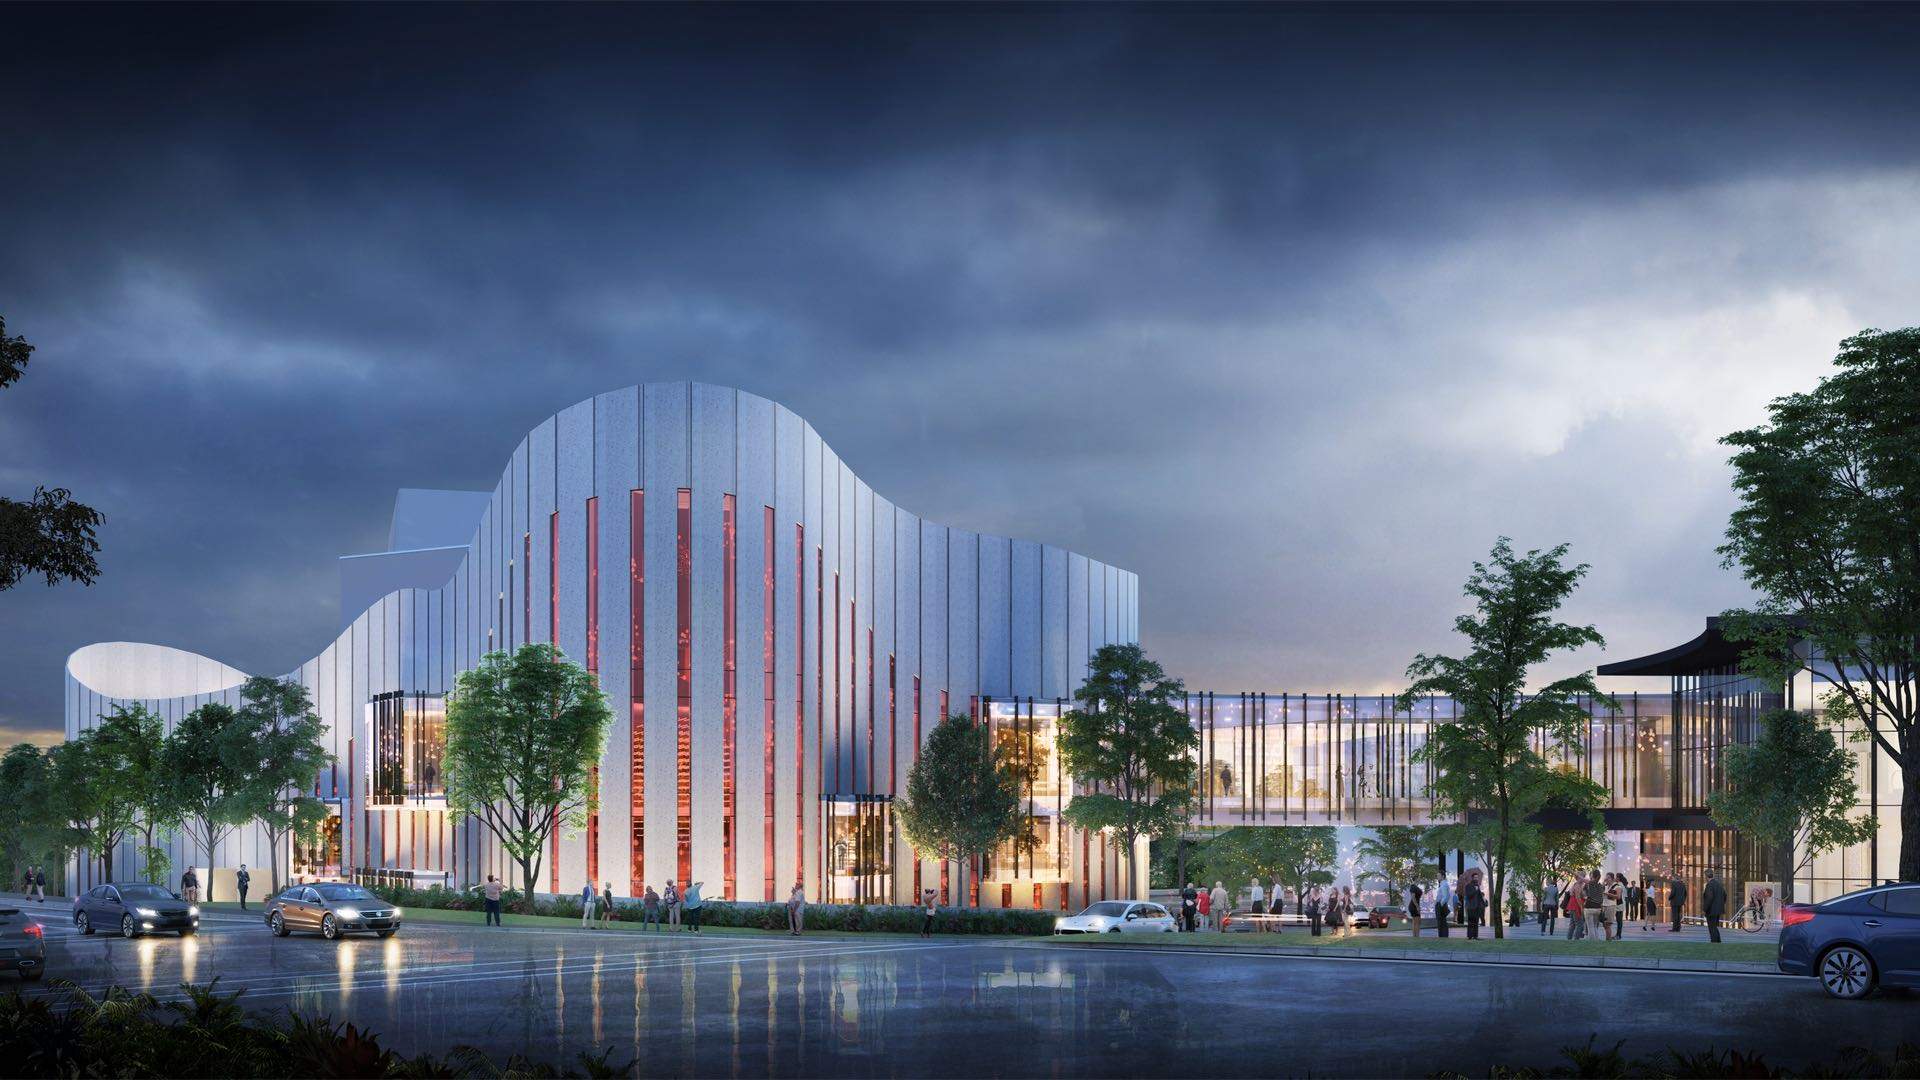 Western Sydney's $100 Million Performing Arts Centre Is Nearing Completion